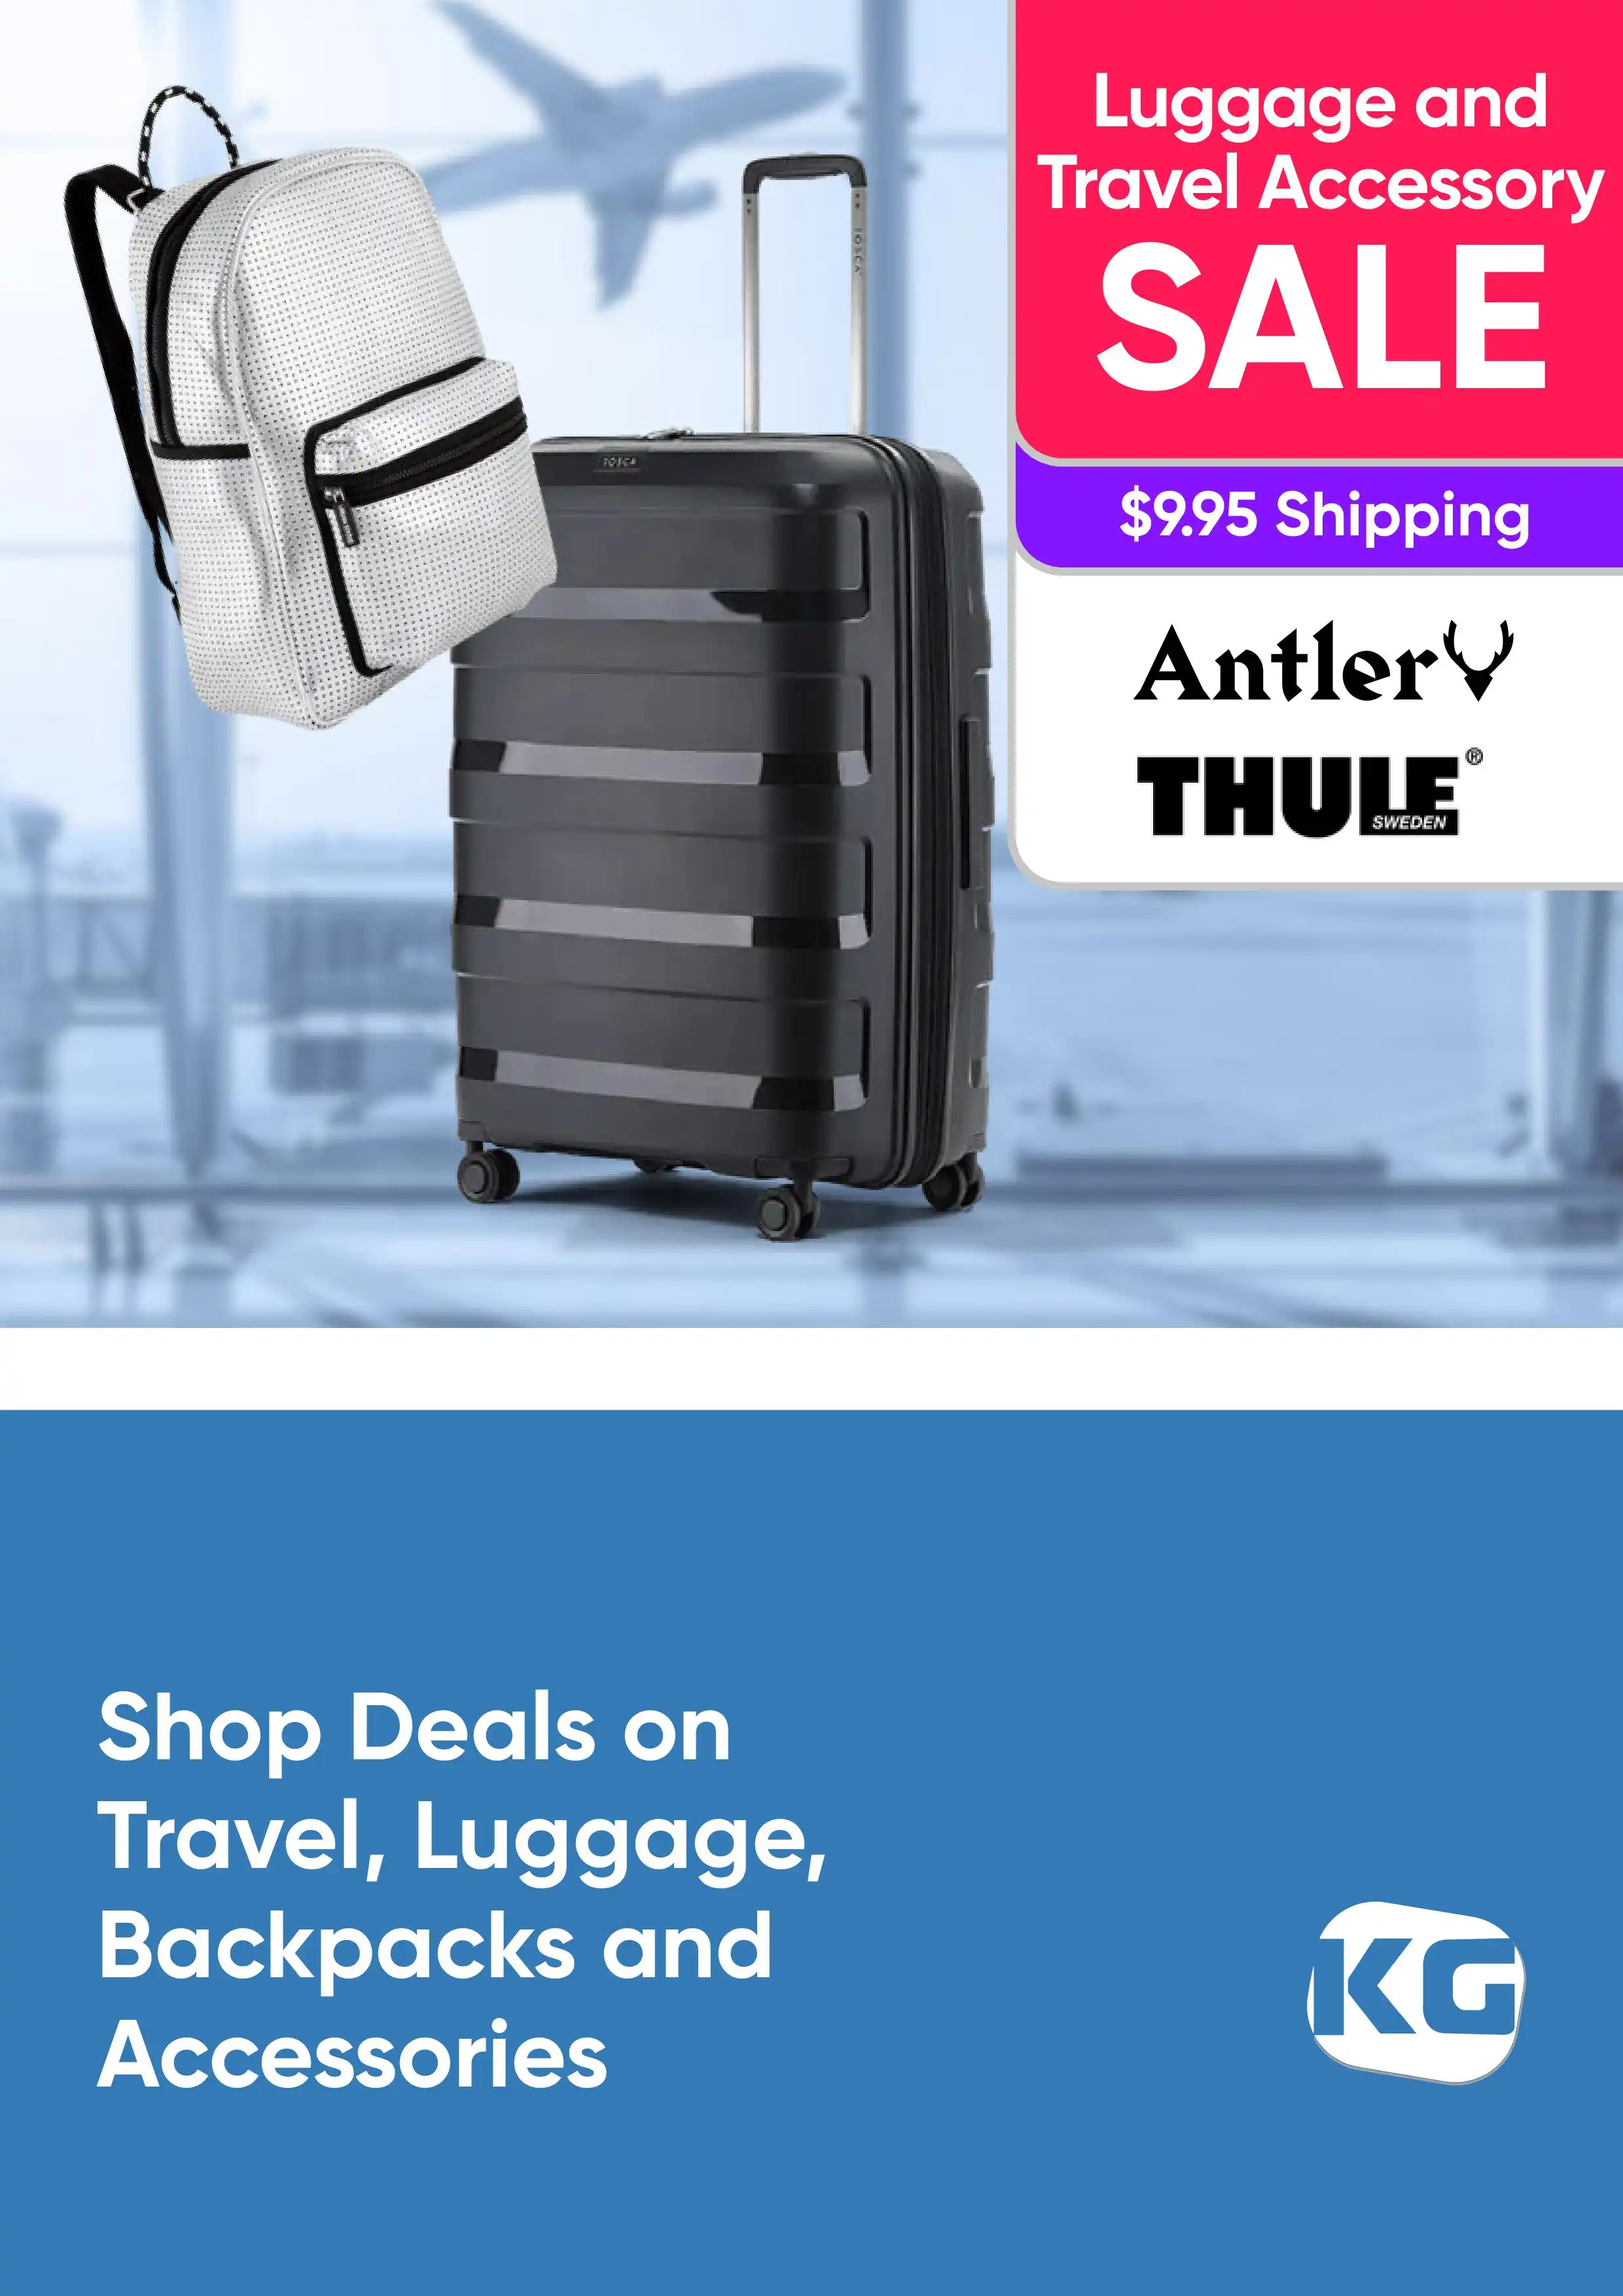 Shop Deals on Travel, Luggage, Backpacks and Accessories